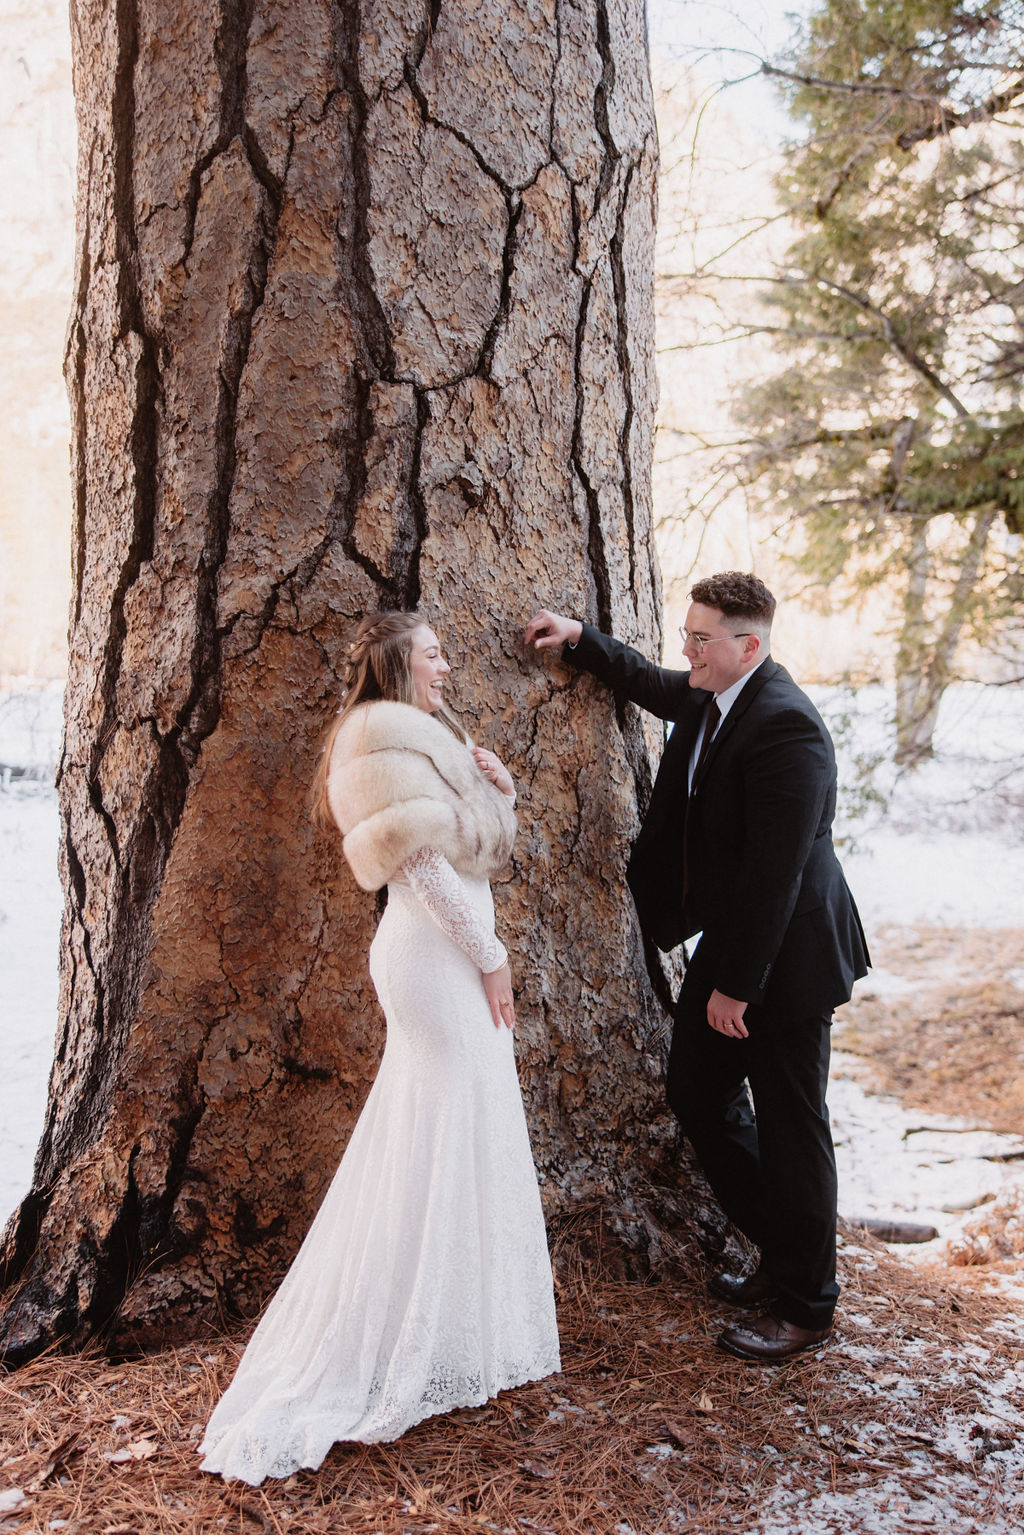 A couple dressed in wedding attire standing by a large tree in a snowy landscape.